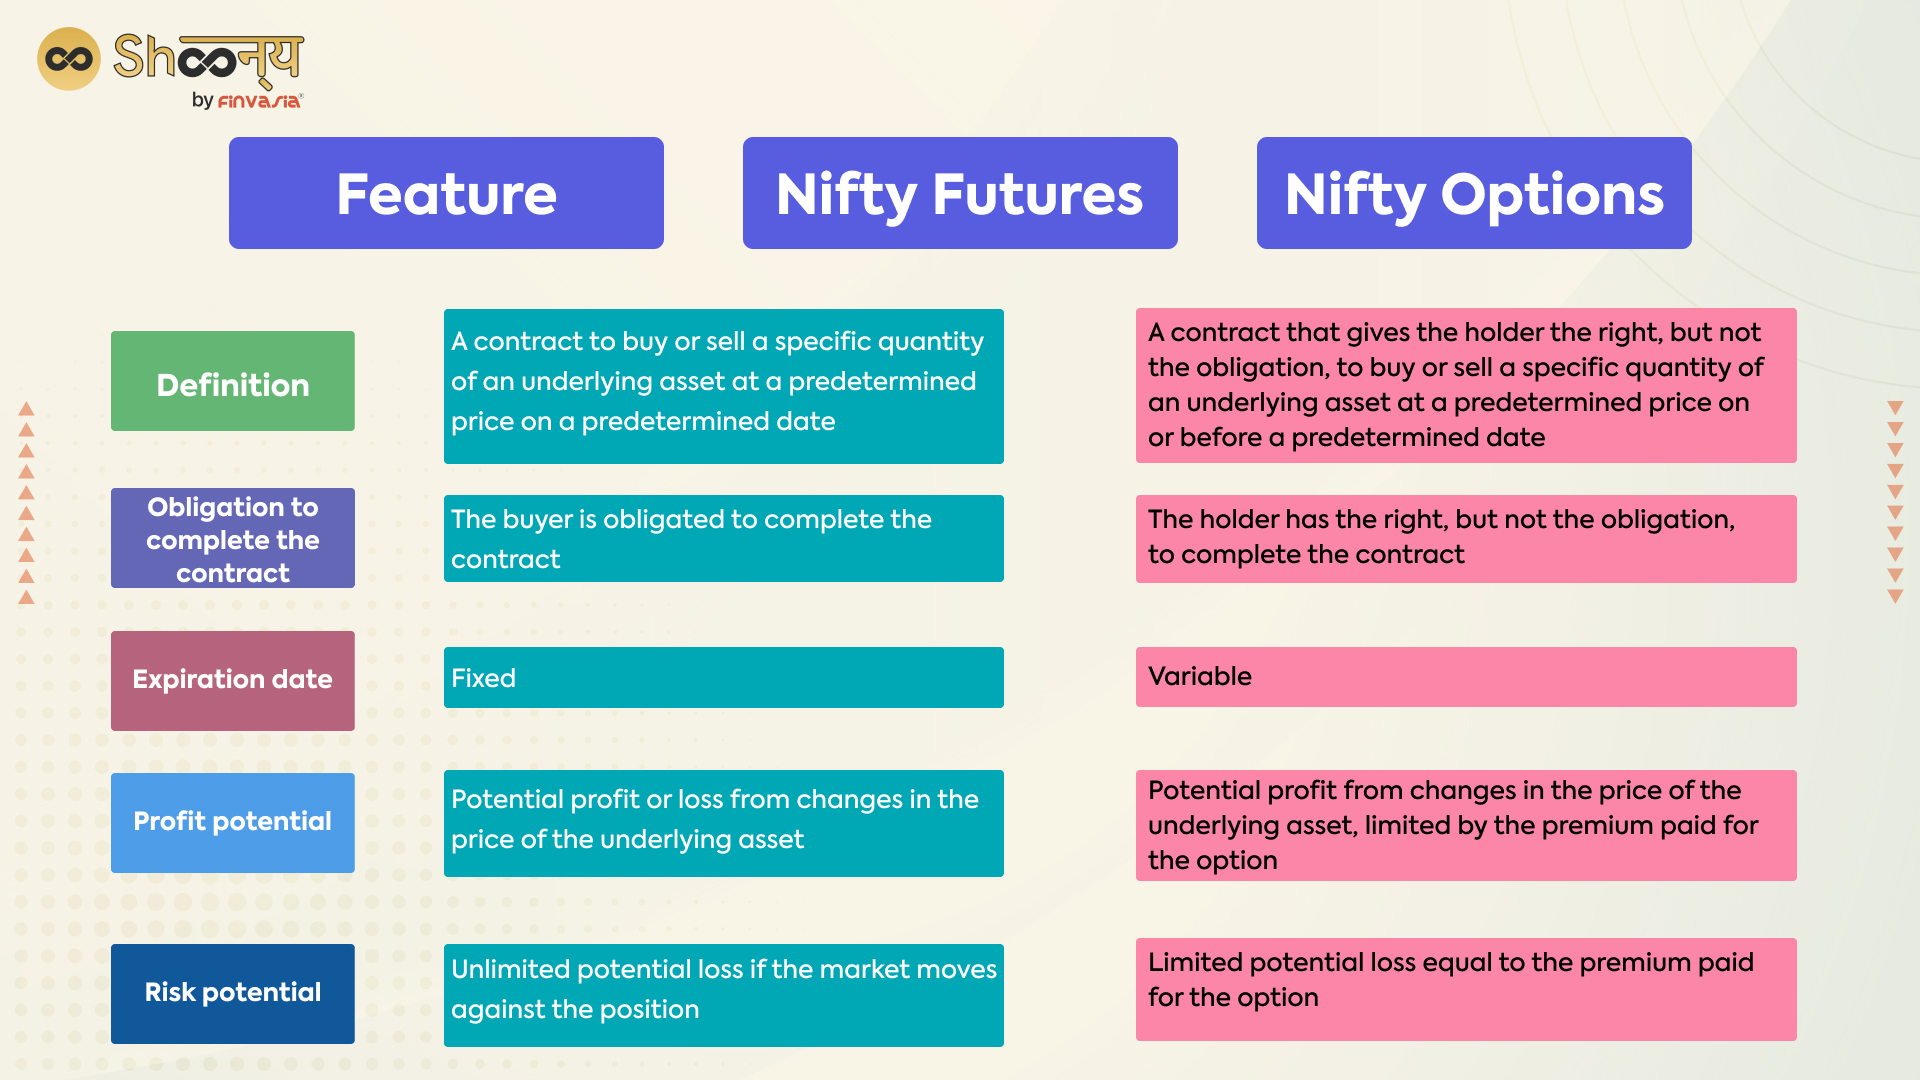 Nifty Futures vs Nifty Options